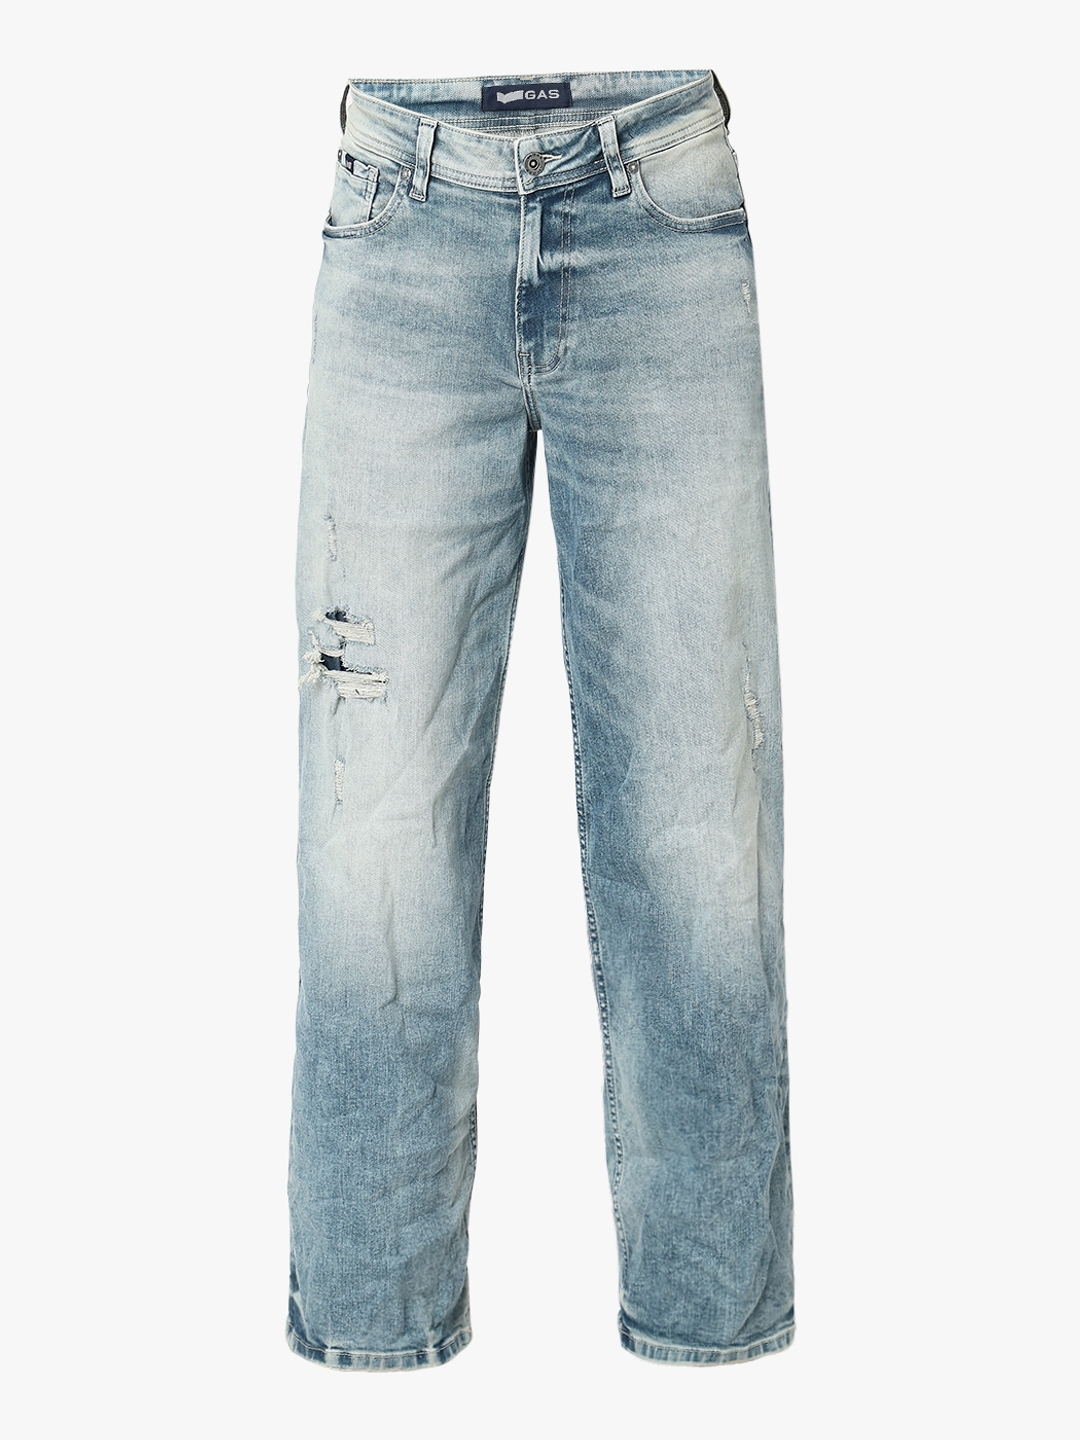 Jeans Gas Trousers - Buy Jeans Gas Trousers online in India